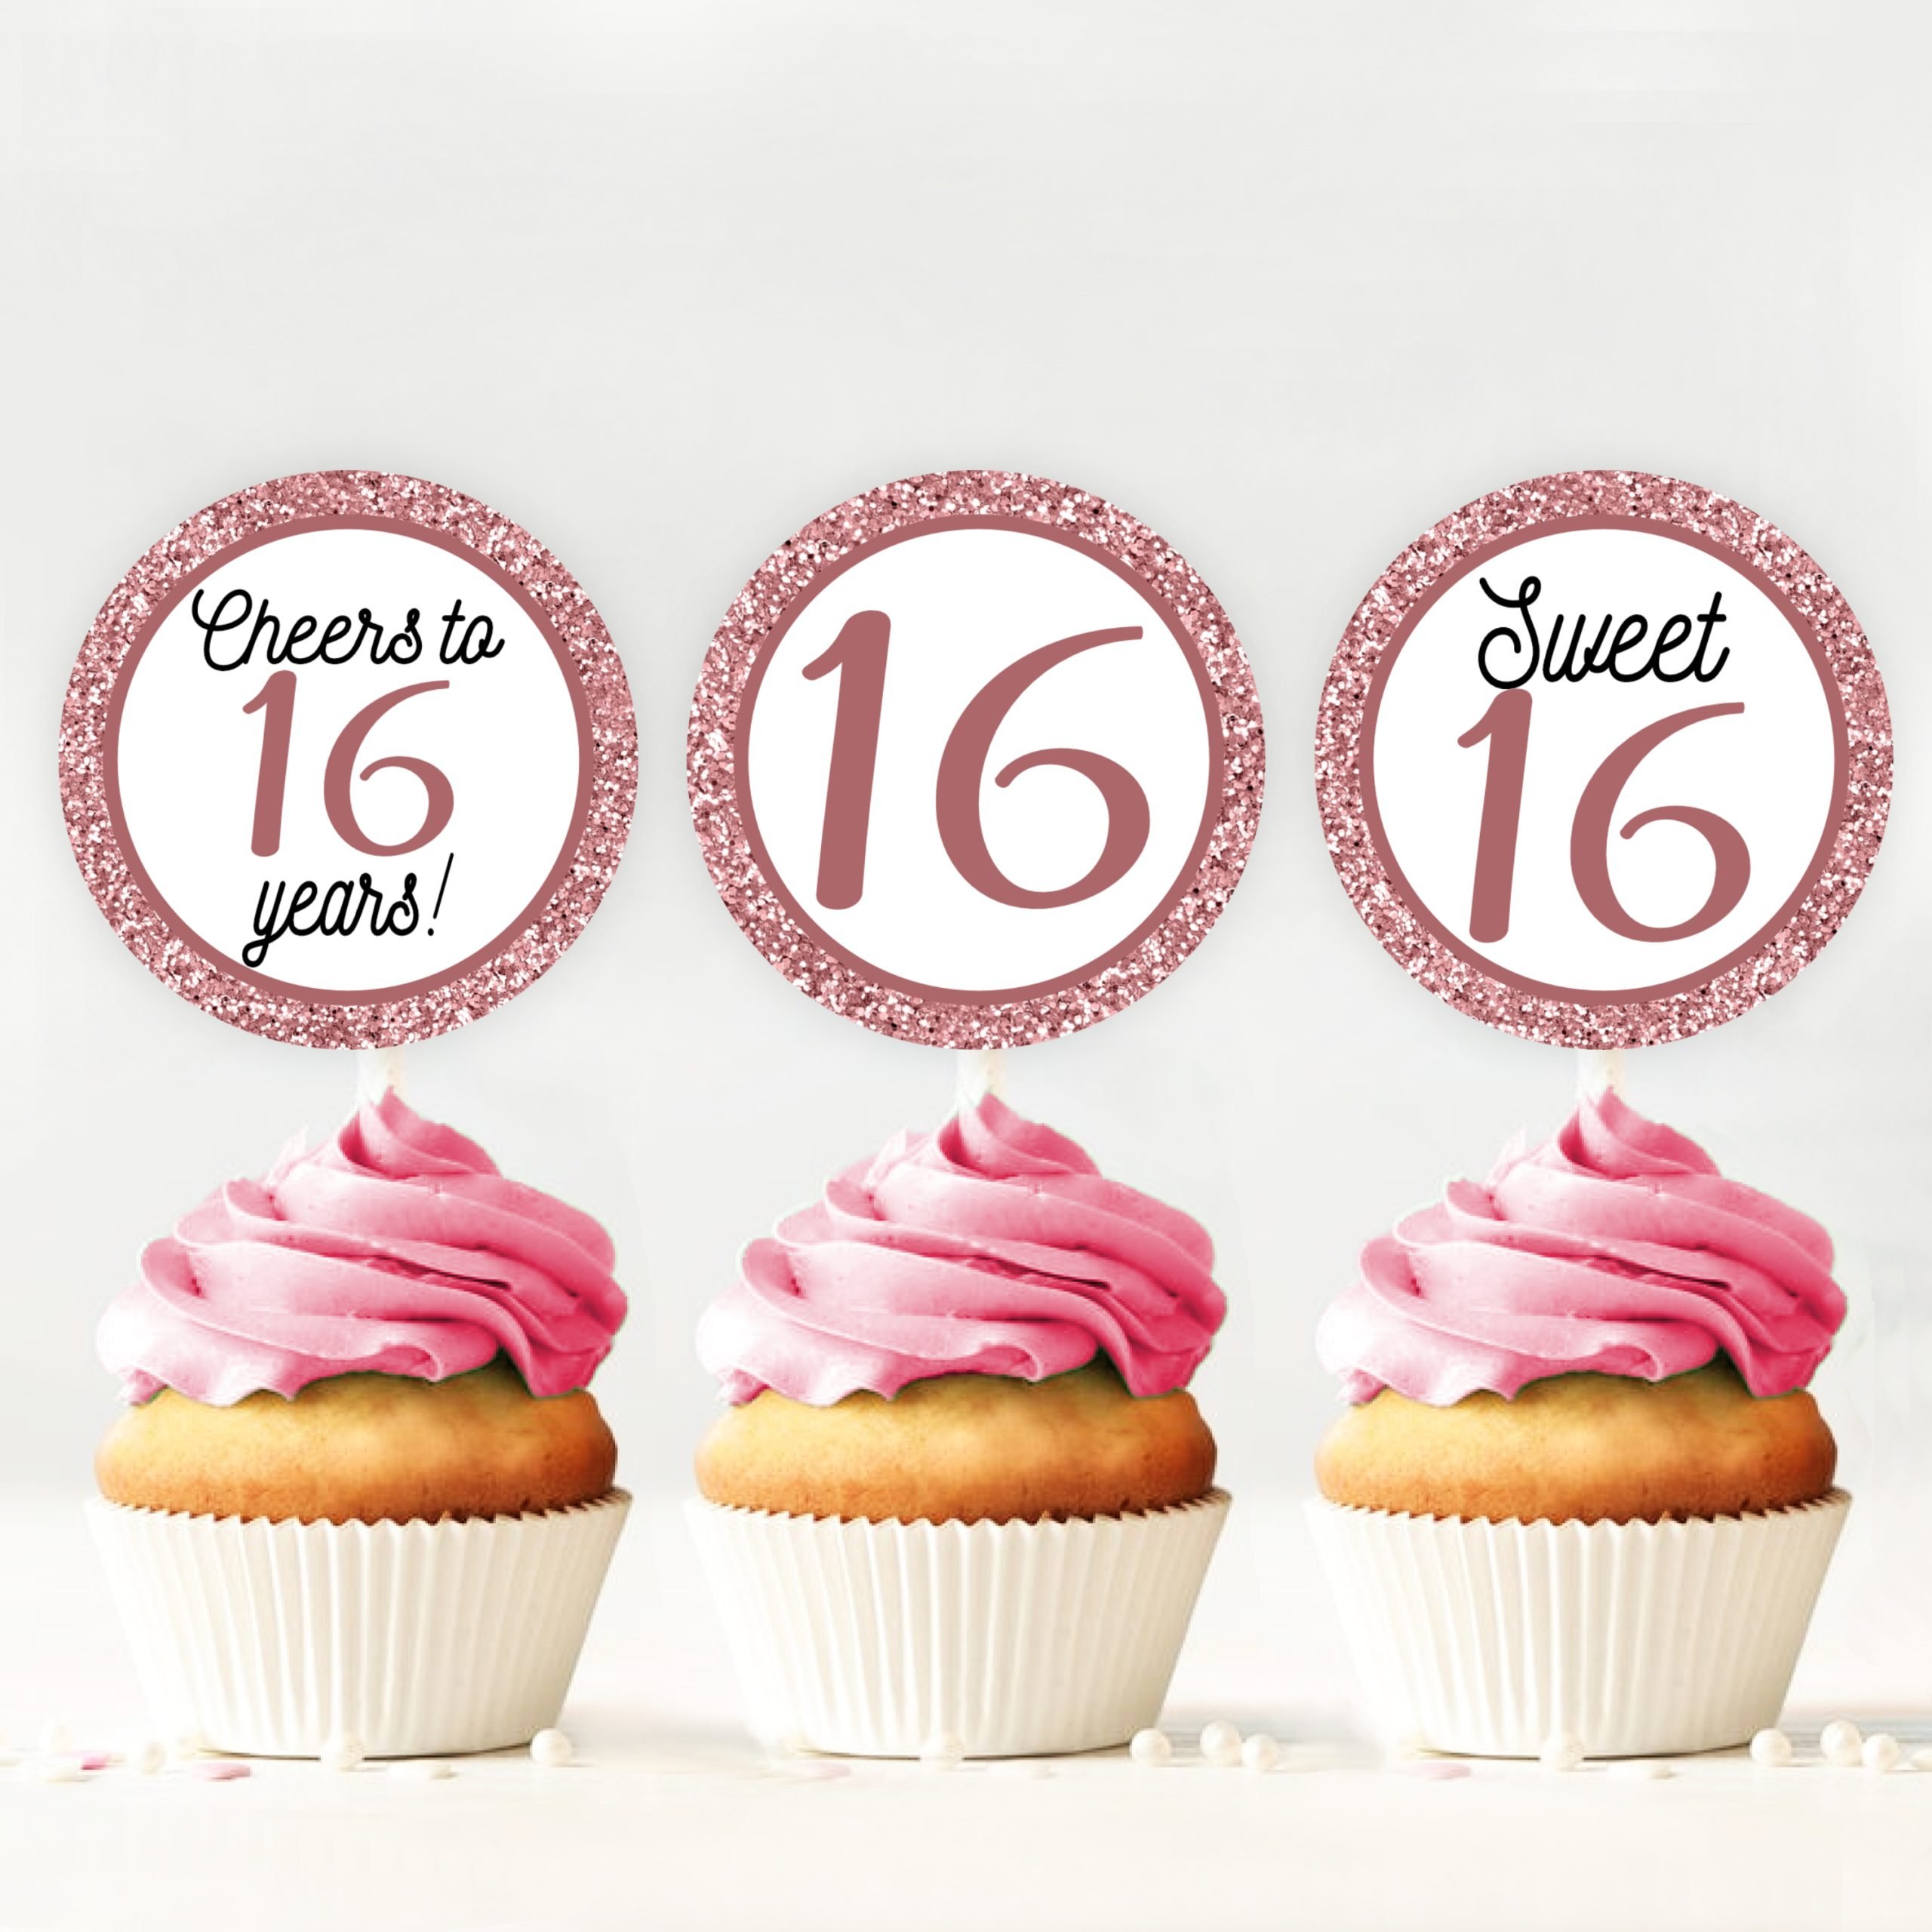 Cupcake Toppers 16th Birthday Cupcake Toppers & Favor Tags, Sweet Sixteen Party Decor, PRINTABLE 16th Birthday Cupcake Toppers